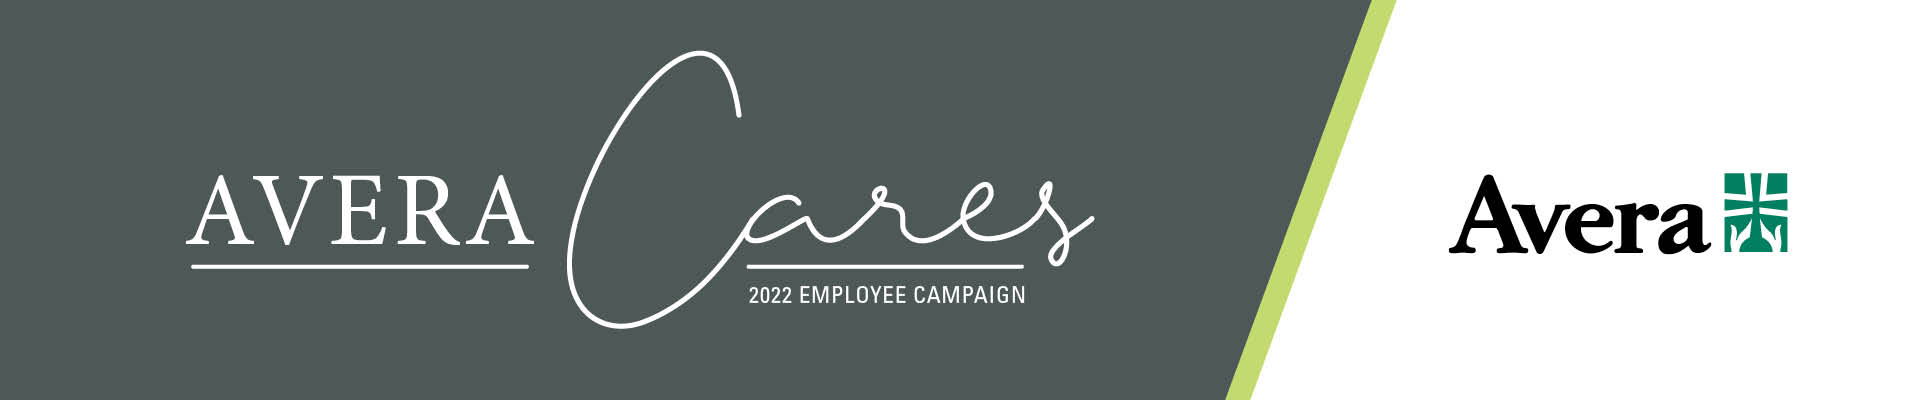 Avera Cares 2022 Employee Giving Campaign